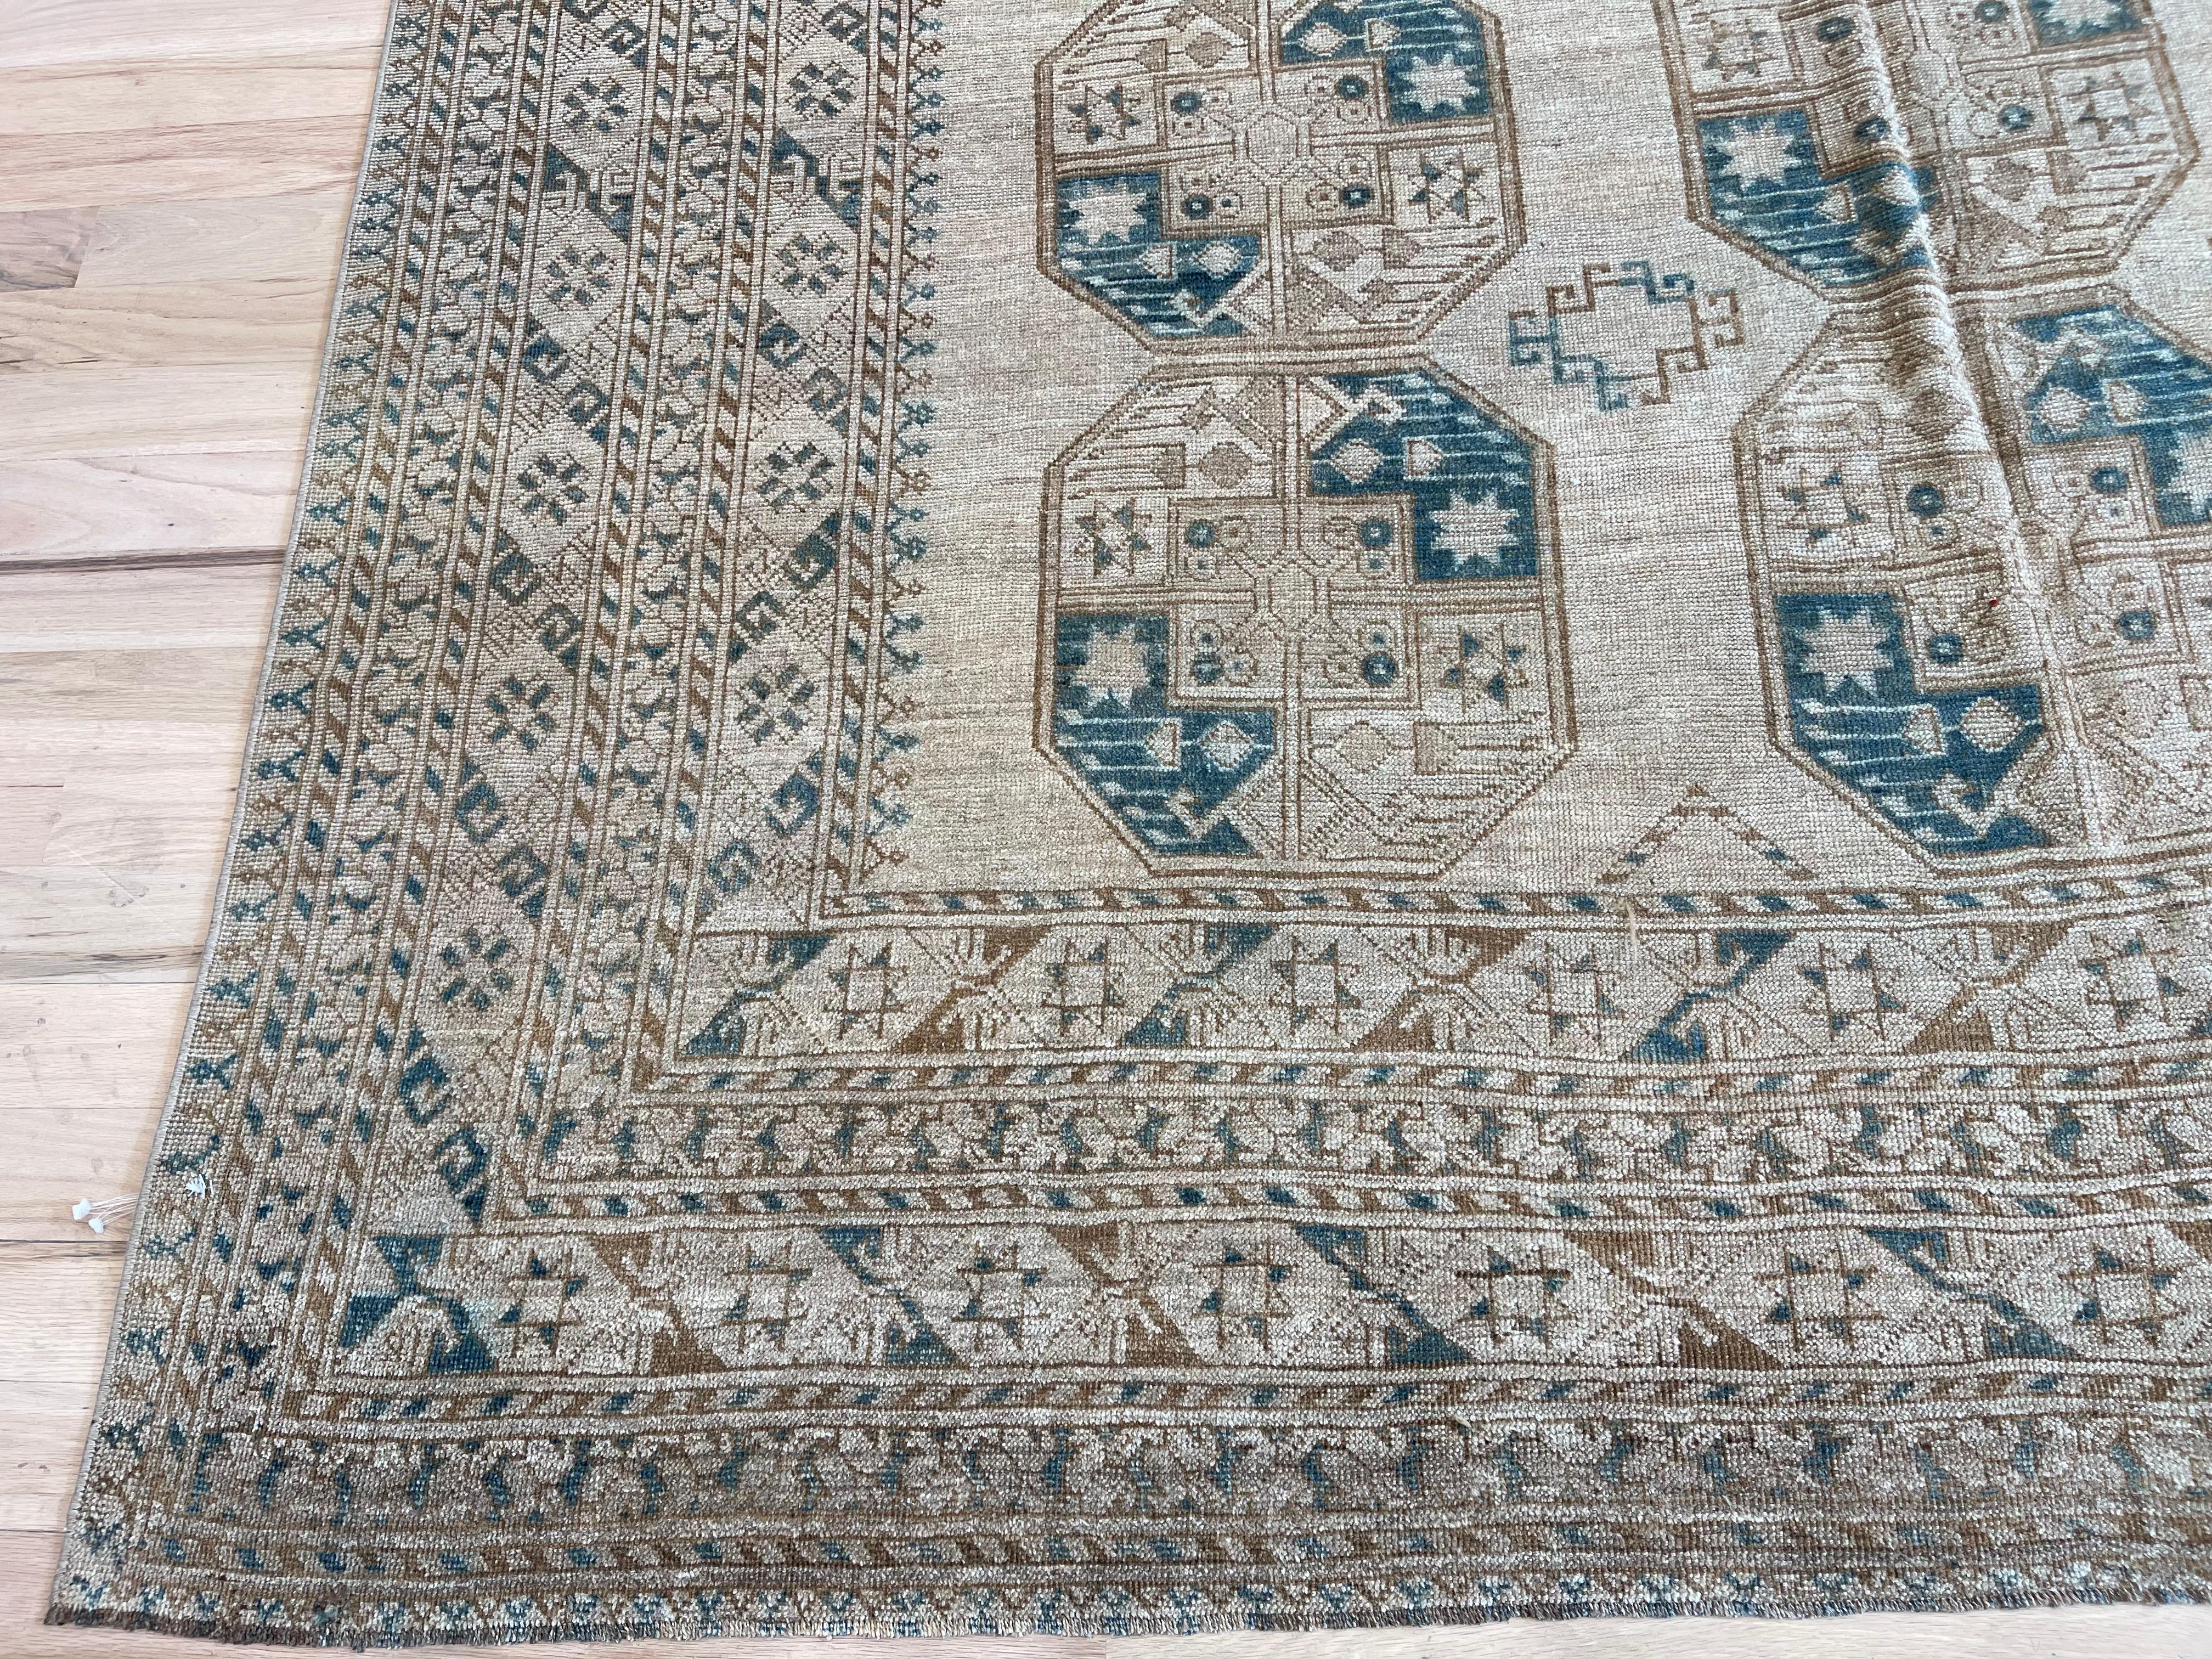 Vintage meets modern with this stunning Turkish rug. 
Made entirely from wool, its deep hues of blues and browns will add warmth and sophistication to any room. 
Enjoy the timeless elegance and durability of this one-of-a-kind piece.